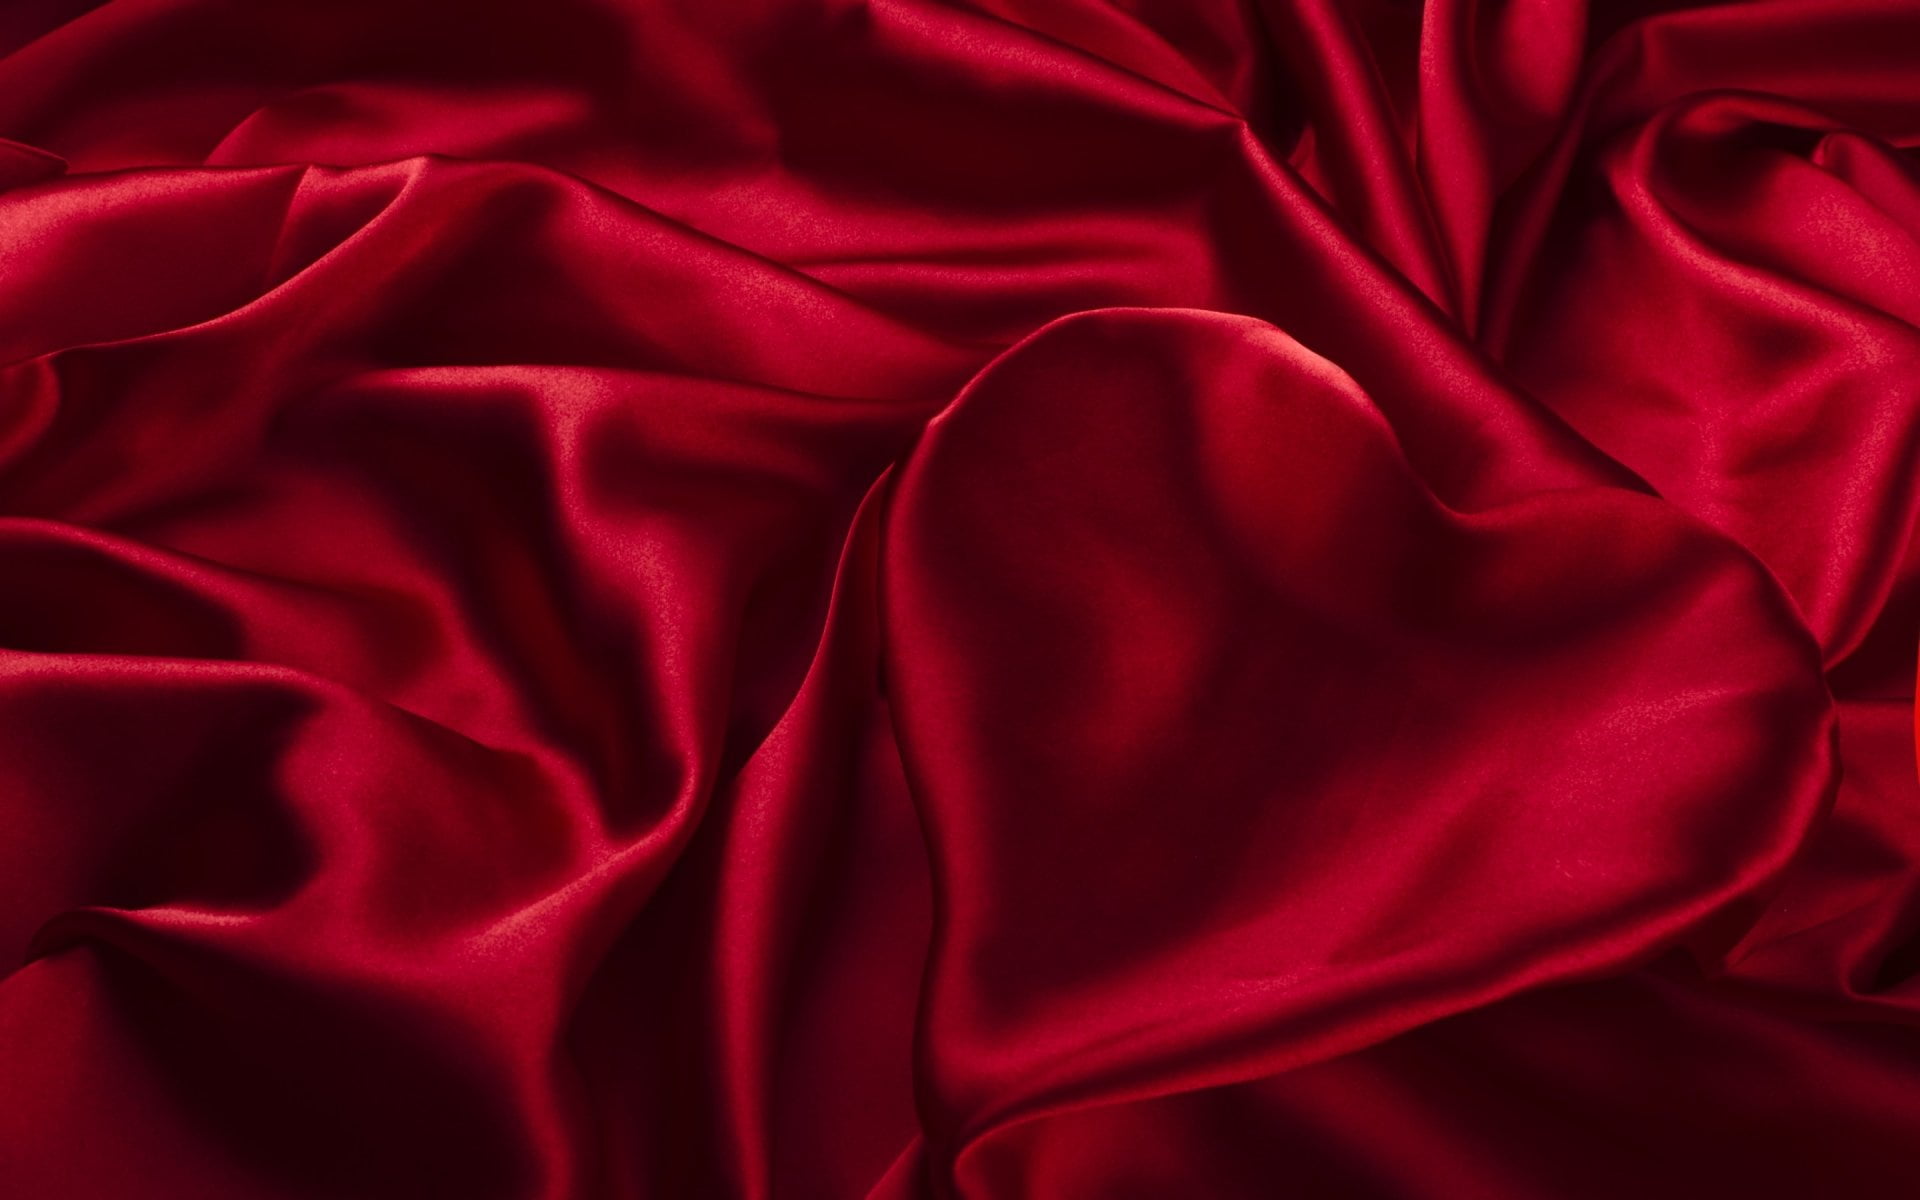 Abstract, Red, satin, luxury, textile, backgrounds, full frame